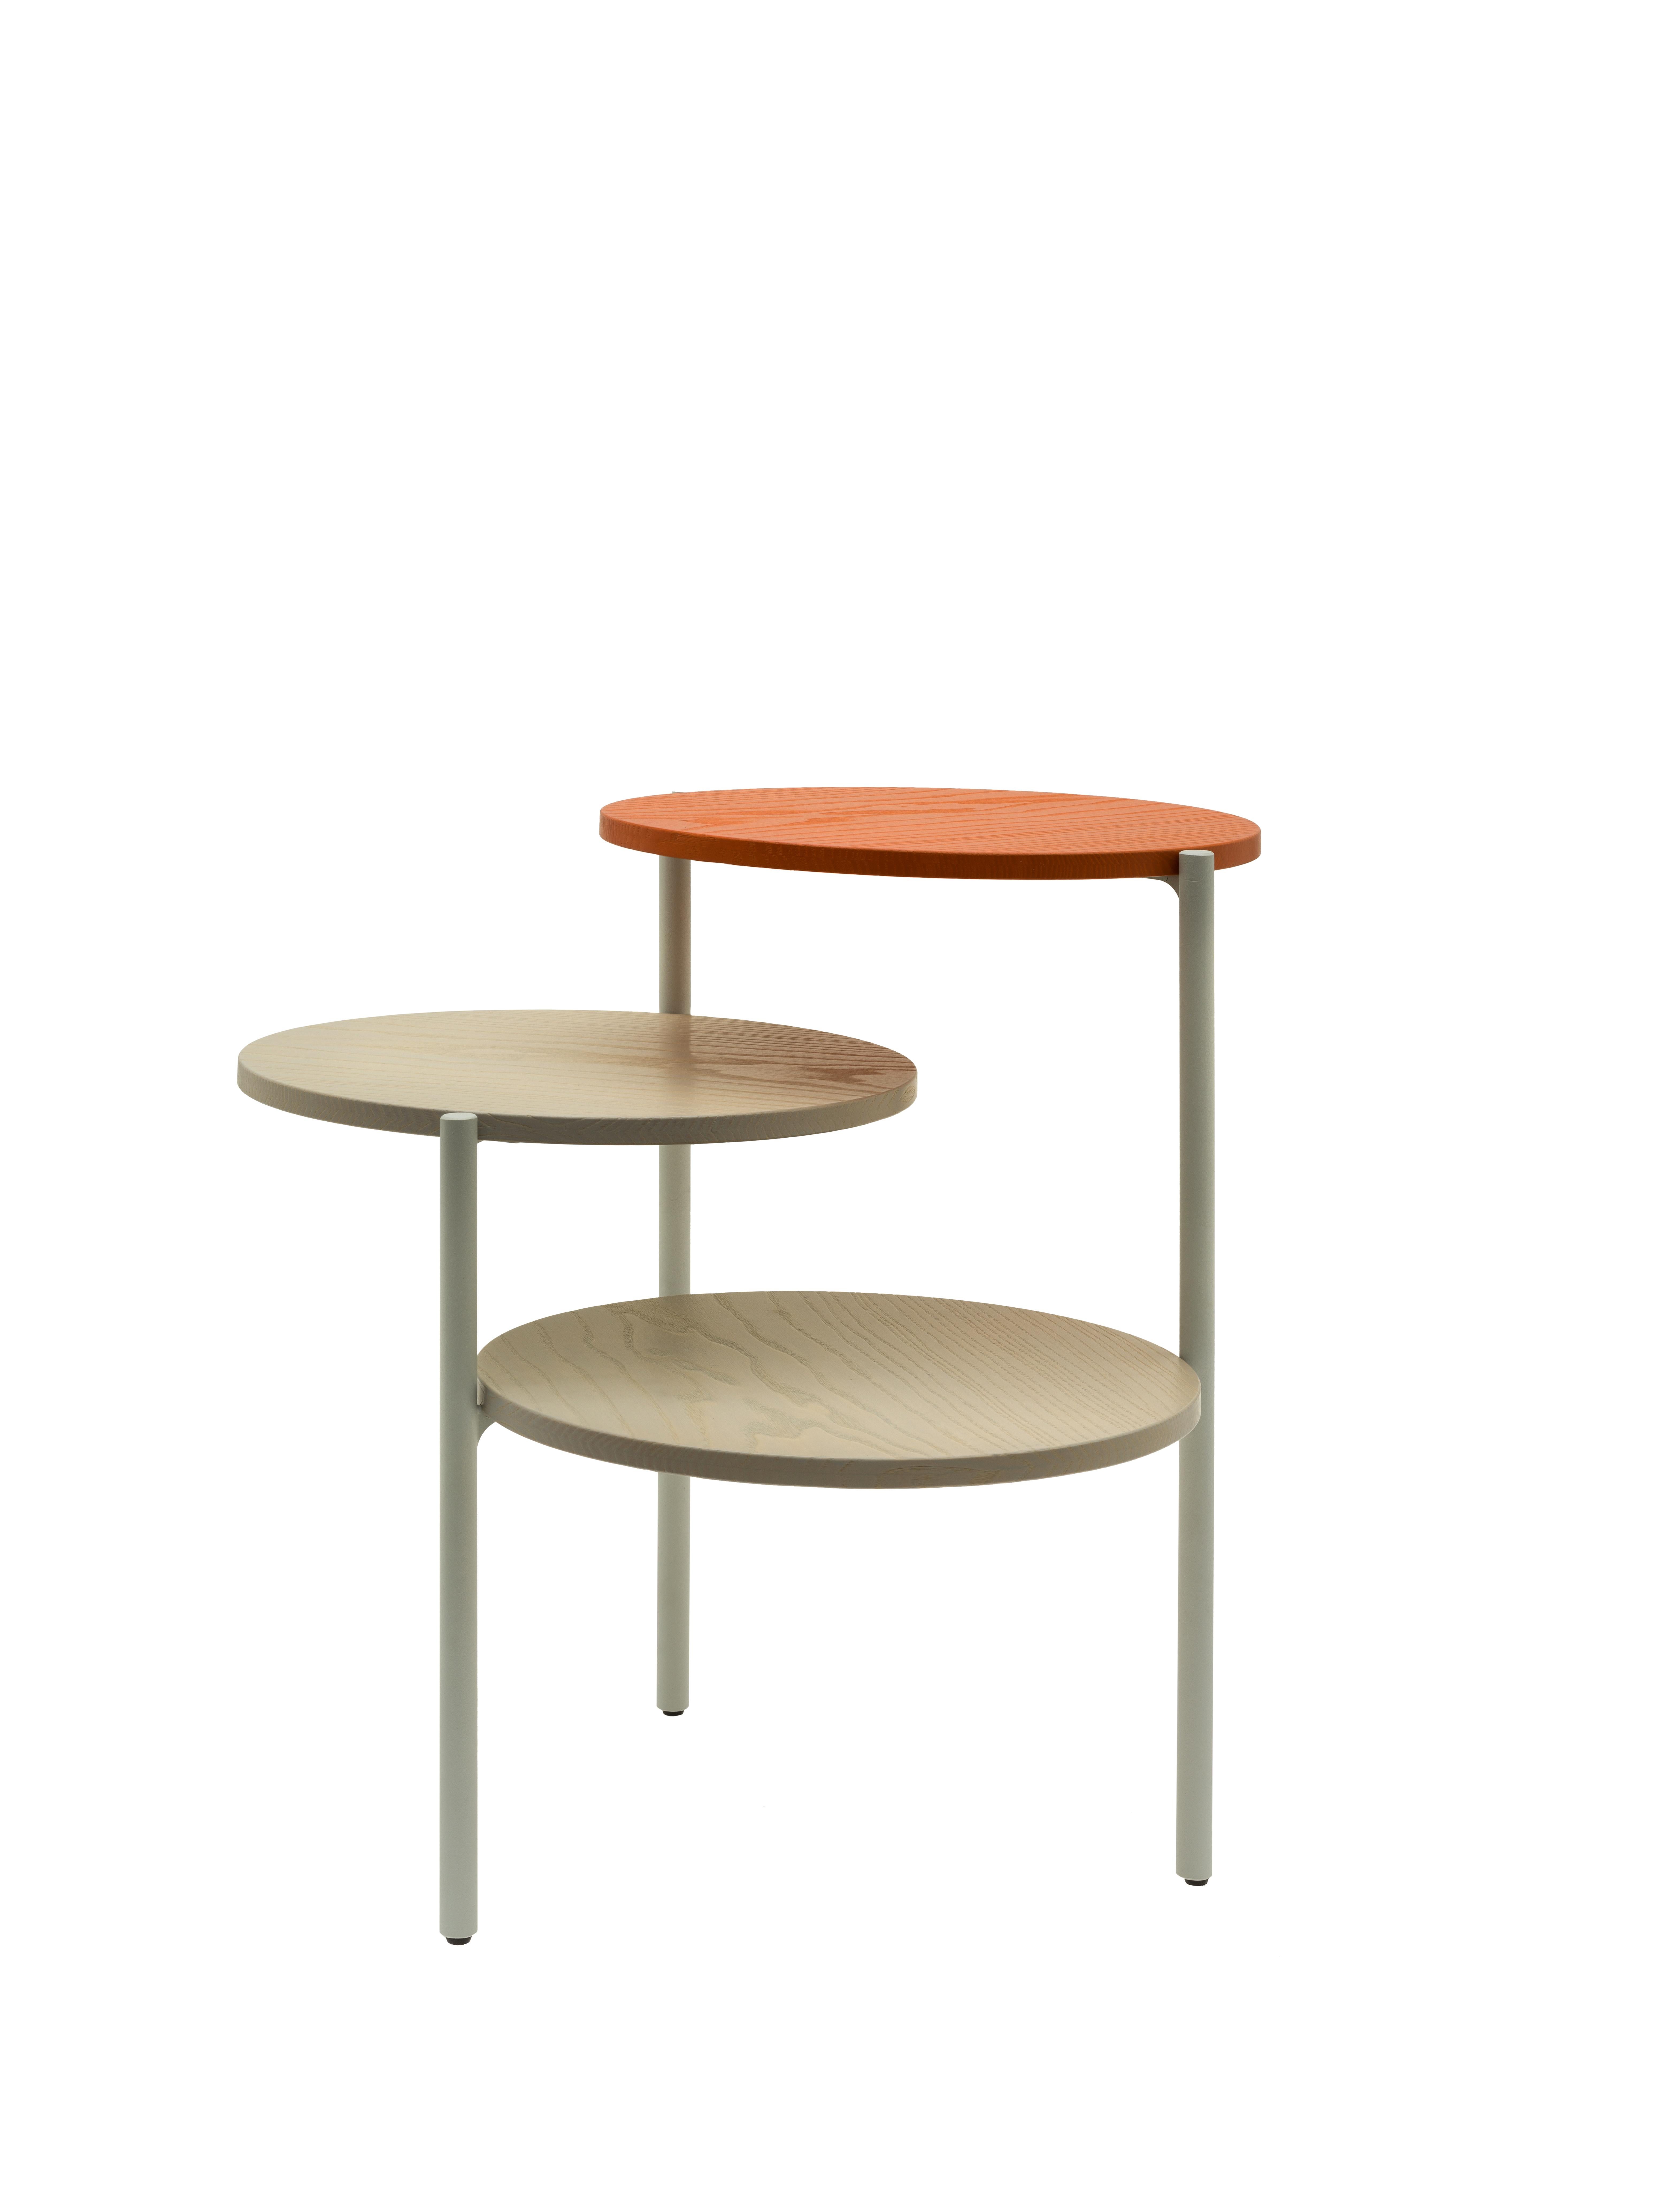 Grey & pumpkin triplo table by Mason Editions
Dimensions: 54 × 54 × 52.5 cm
Materials: iron, ash
Colours: total black, total blue, total light grey, blue + coral, black + light grey, light grey + pumpkin

This side table is based on the concept